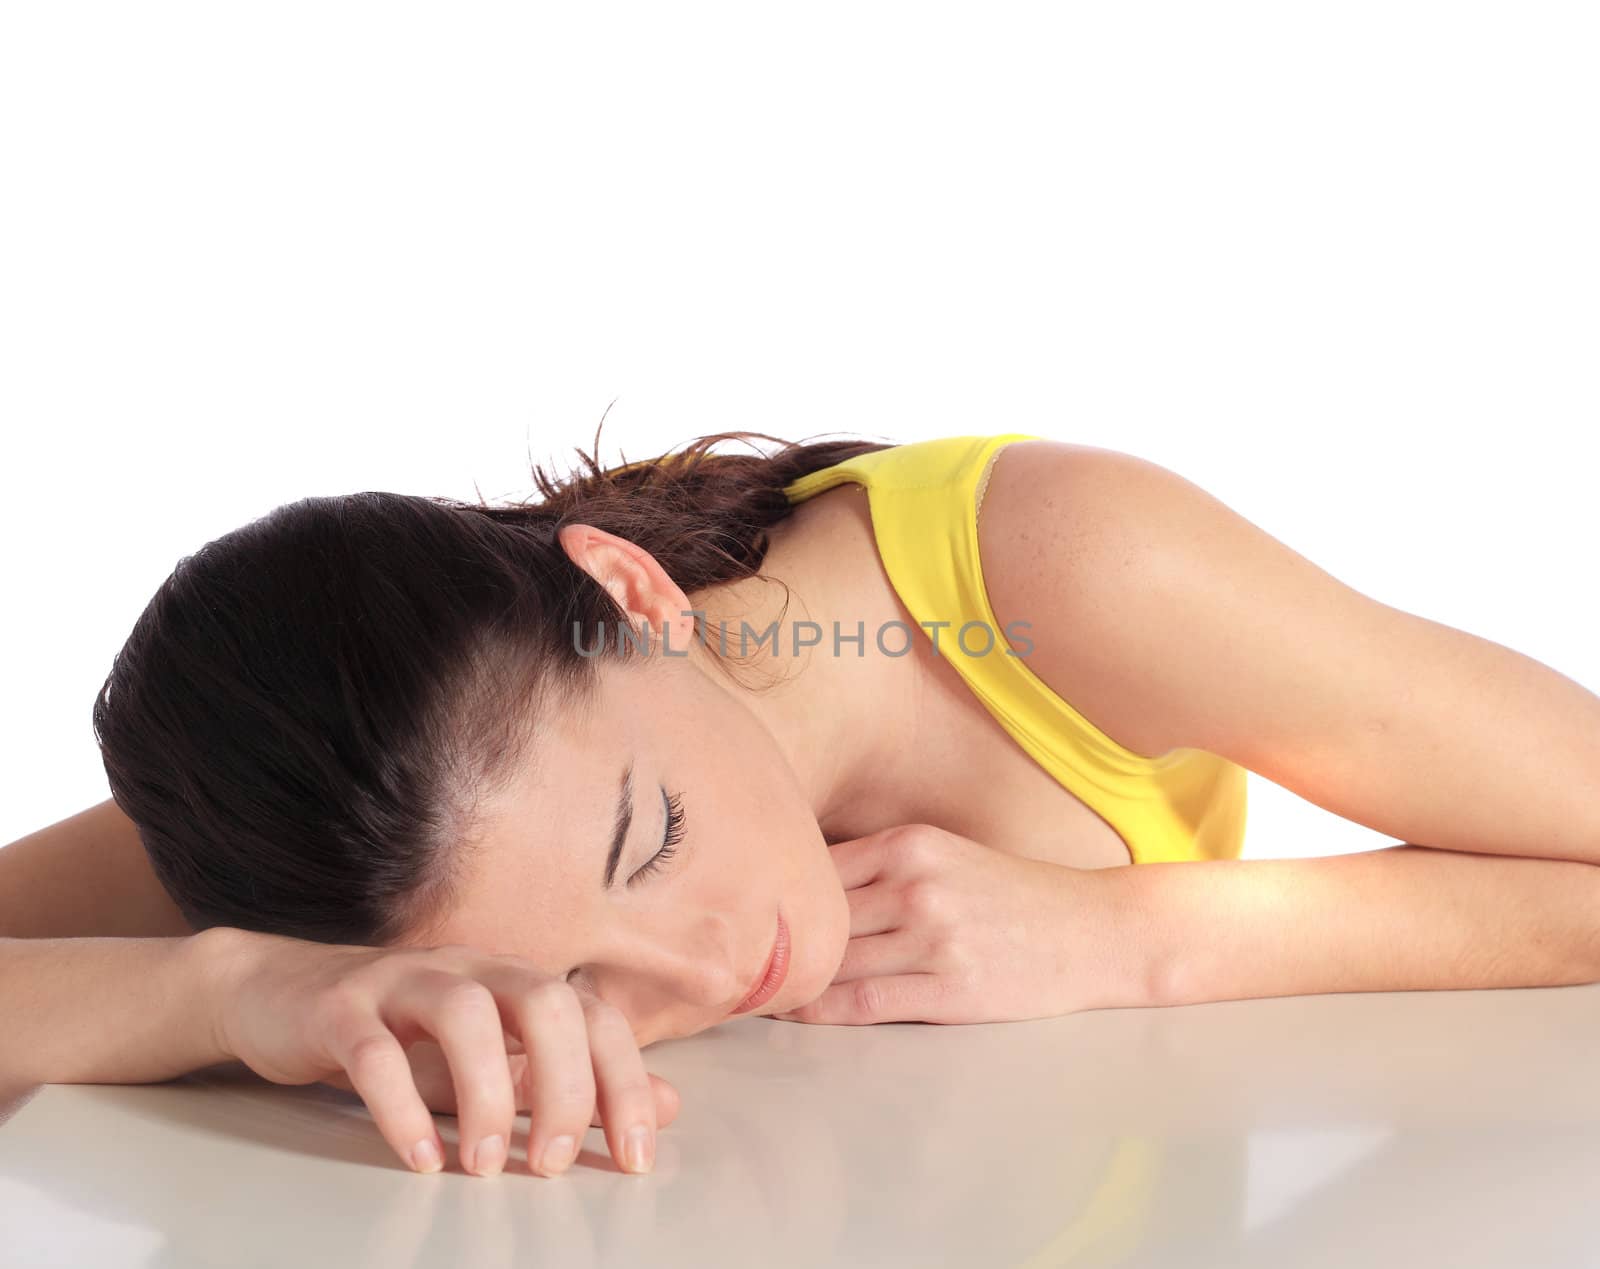 Attractive young woman taking a nap. All on white background.